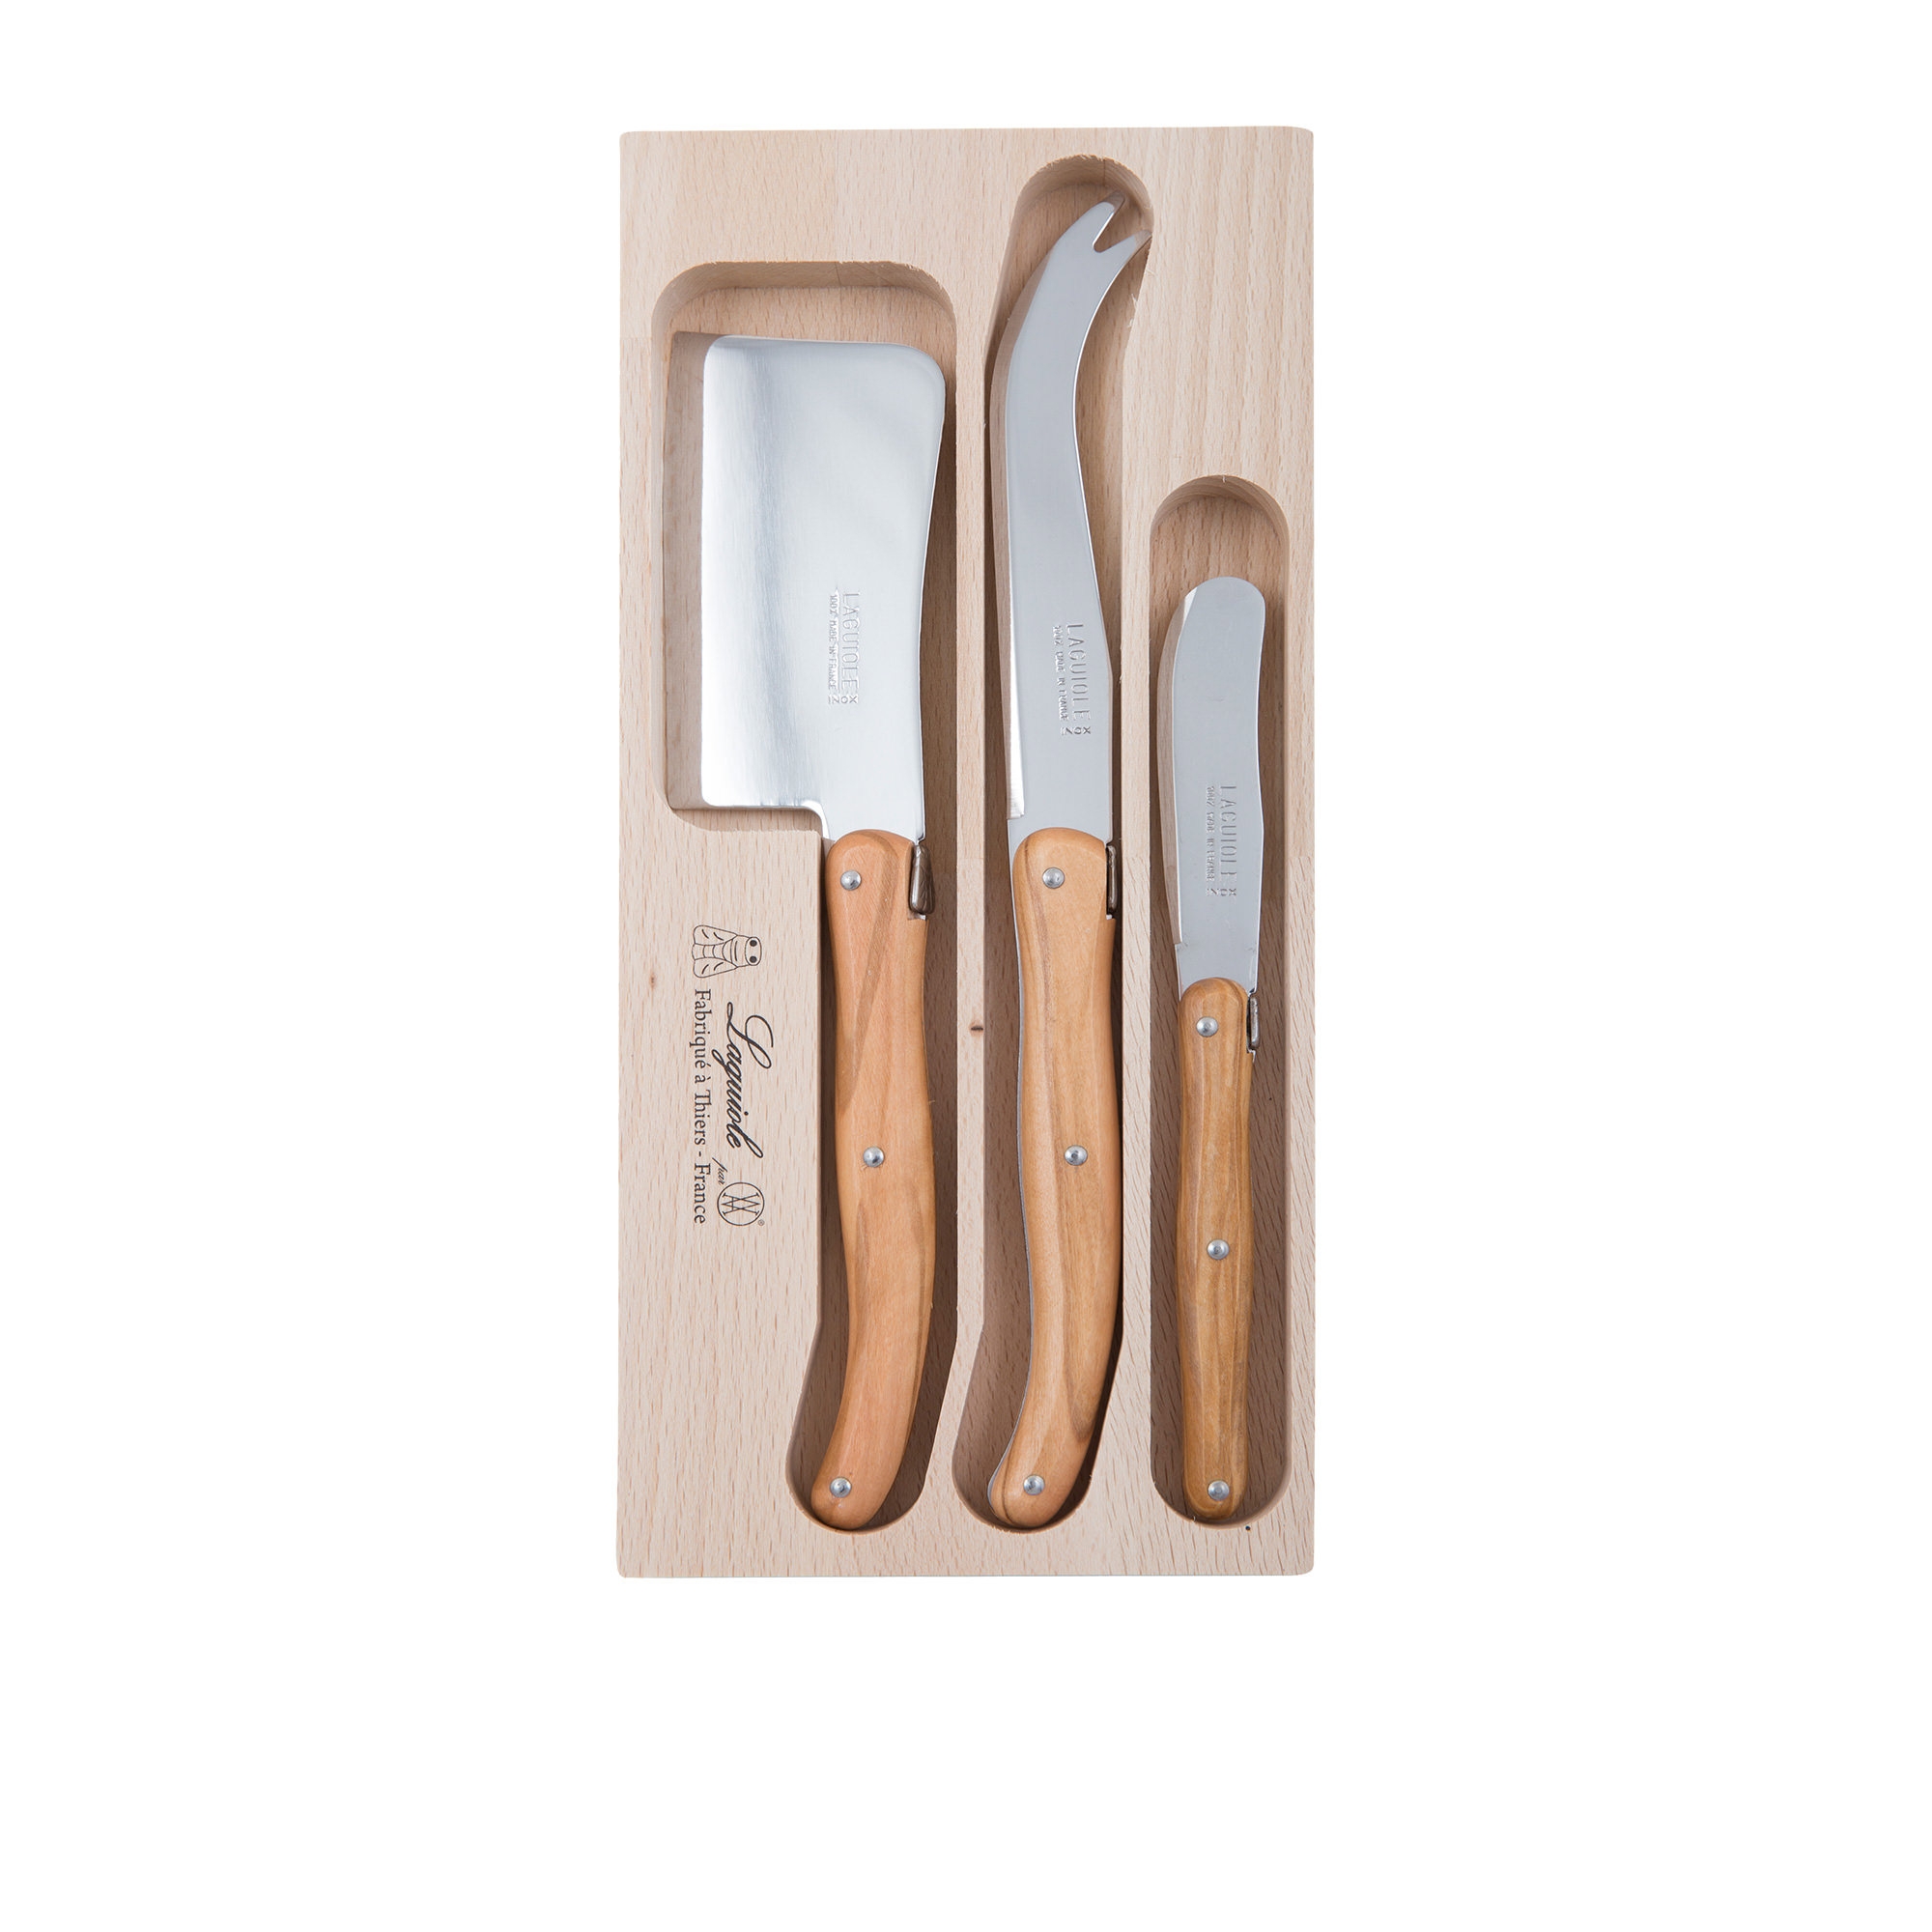 Laguiole by Andre Verdier Debutant Cheese Knife Set 3pc Olive Wood Image 1